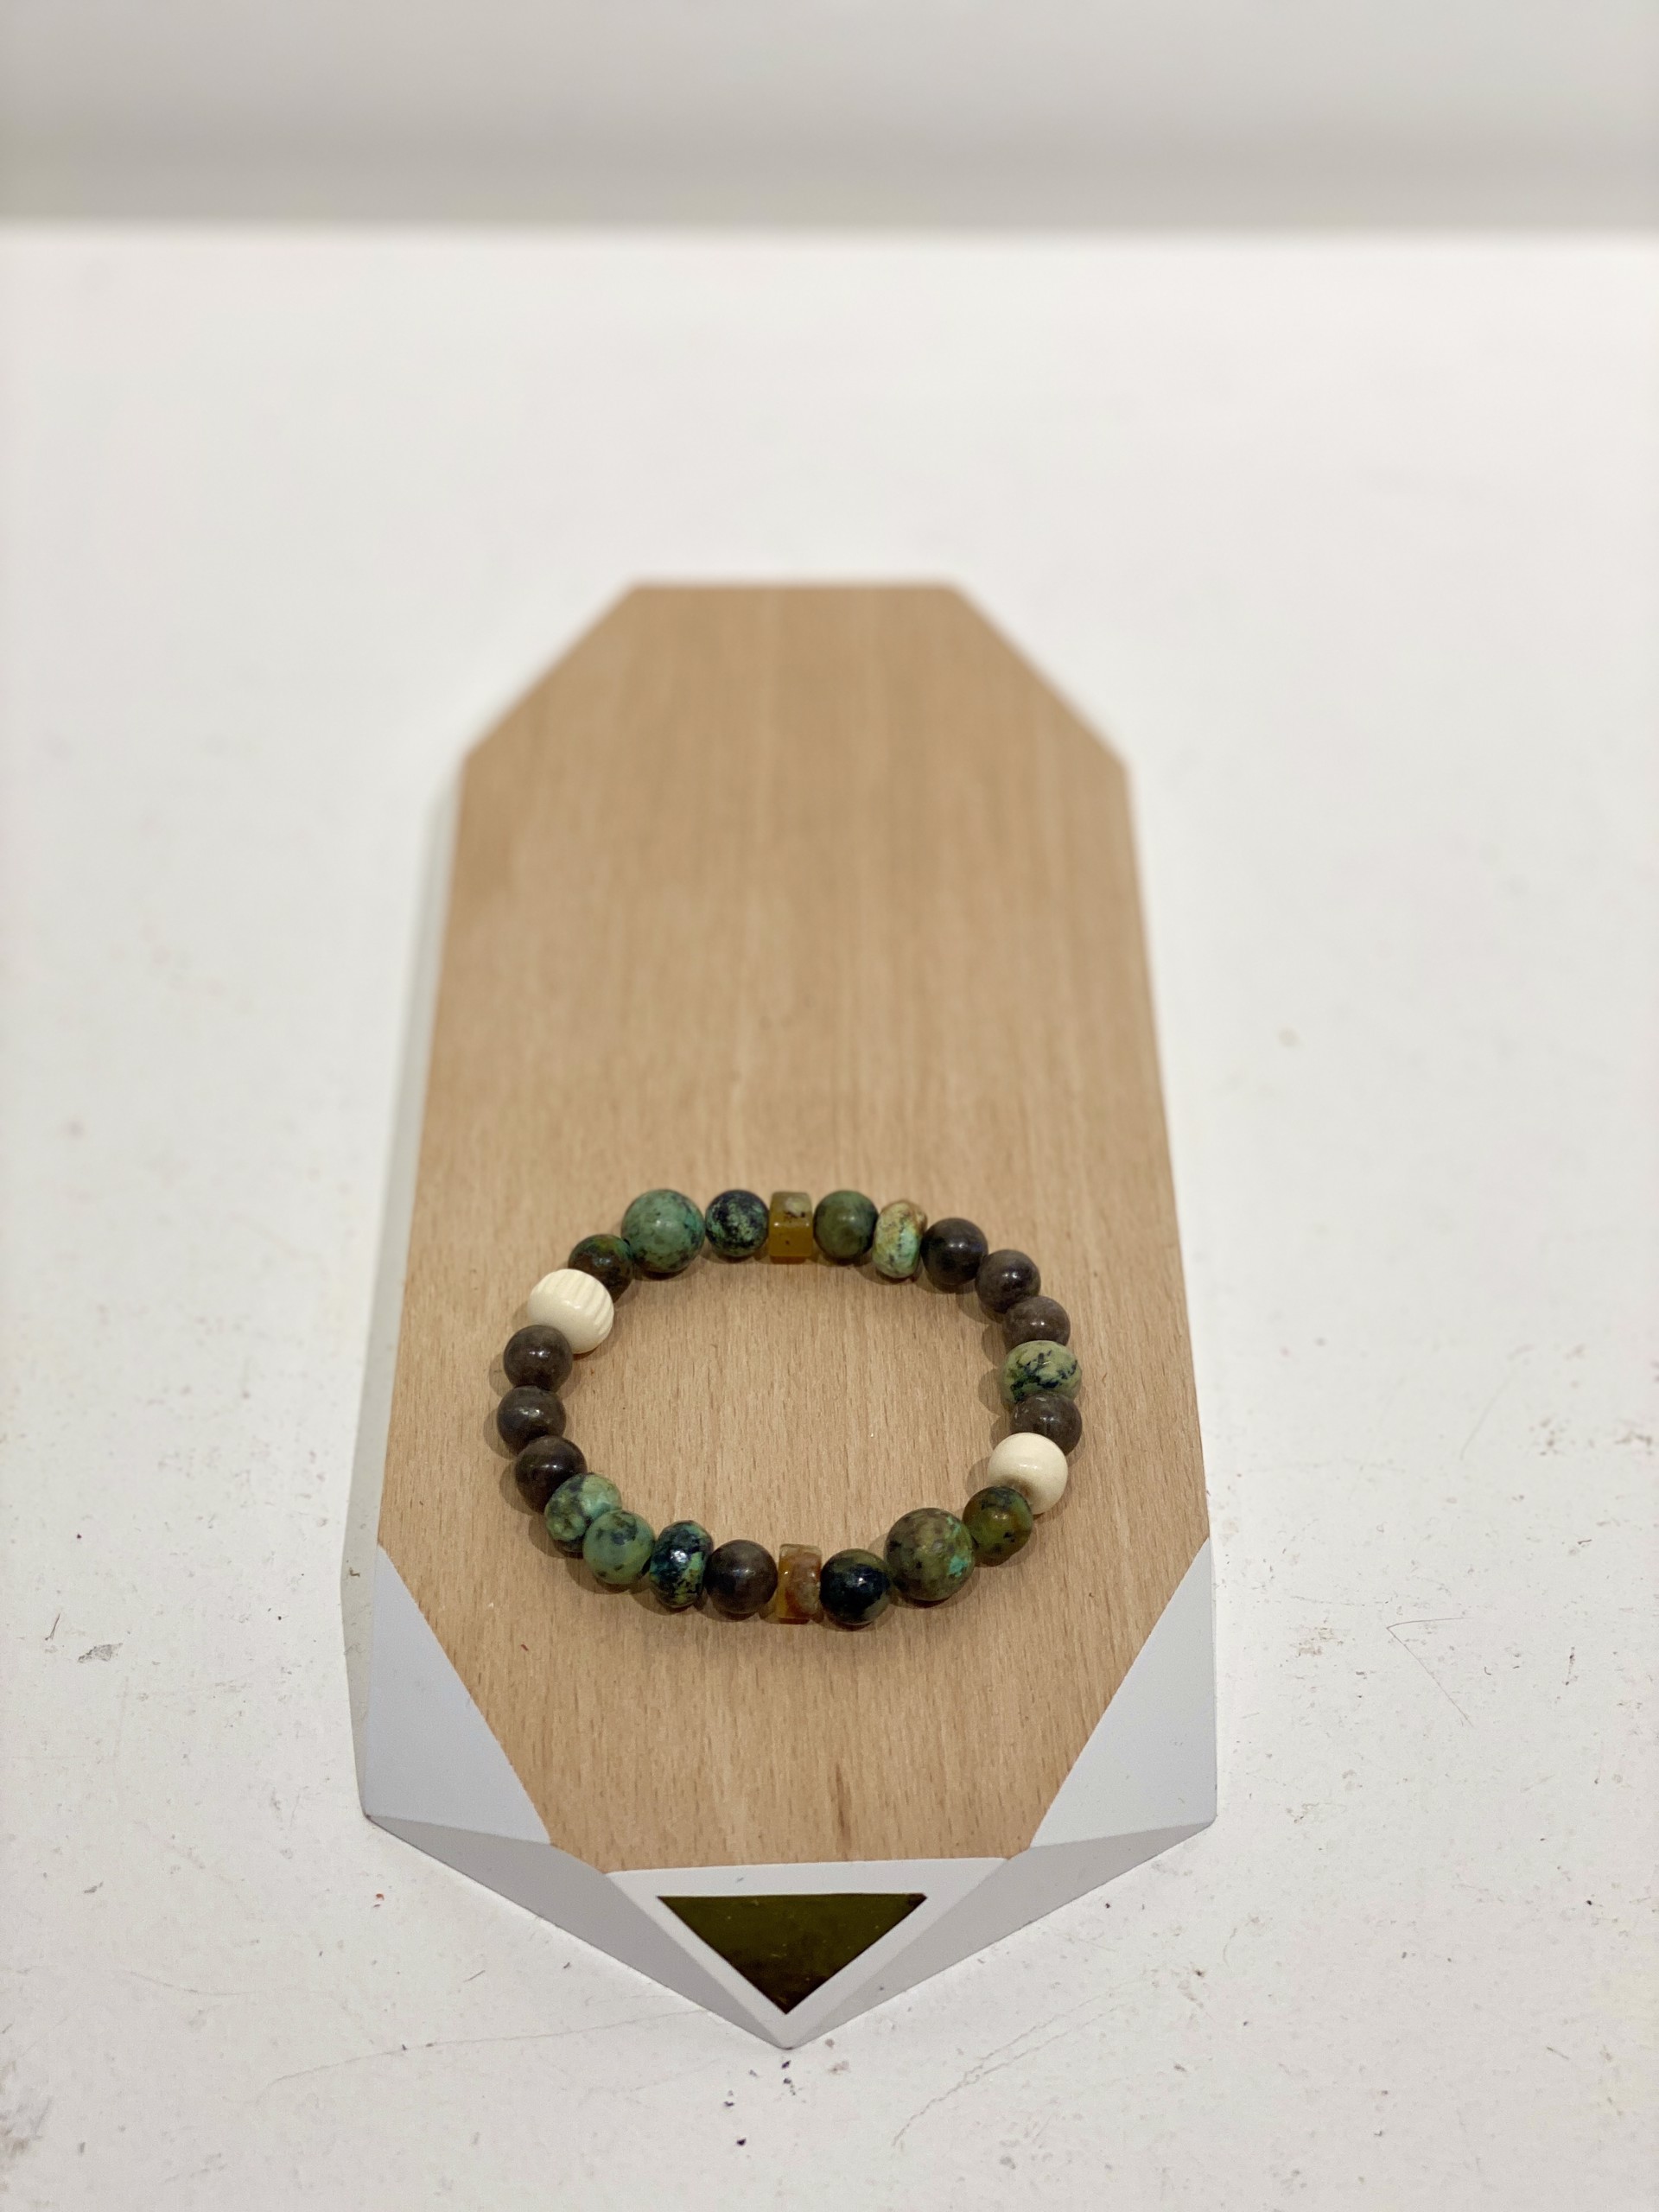 African Turquoise bracelet #28 by Melissa Turney